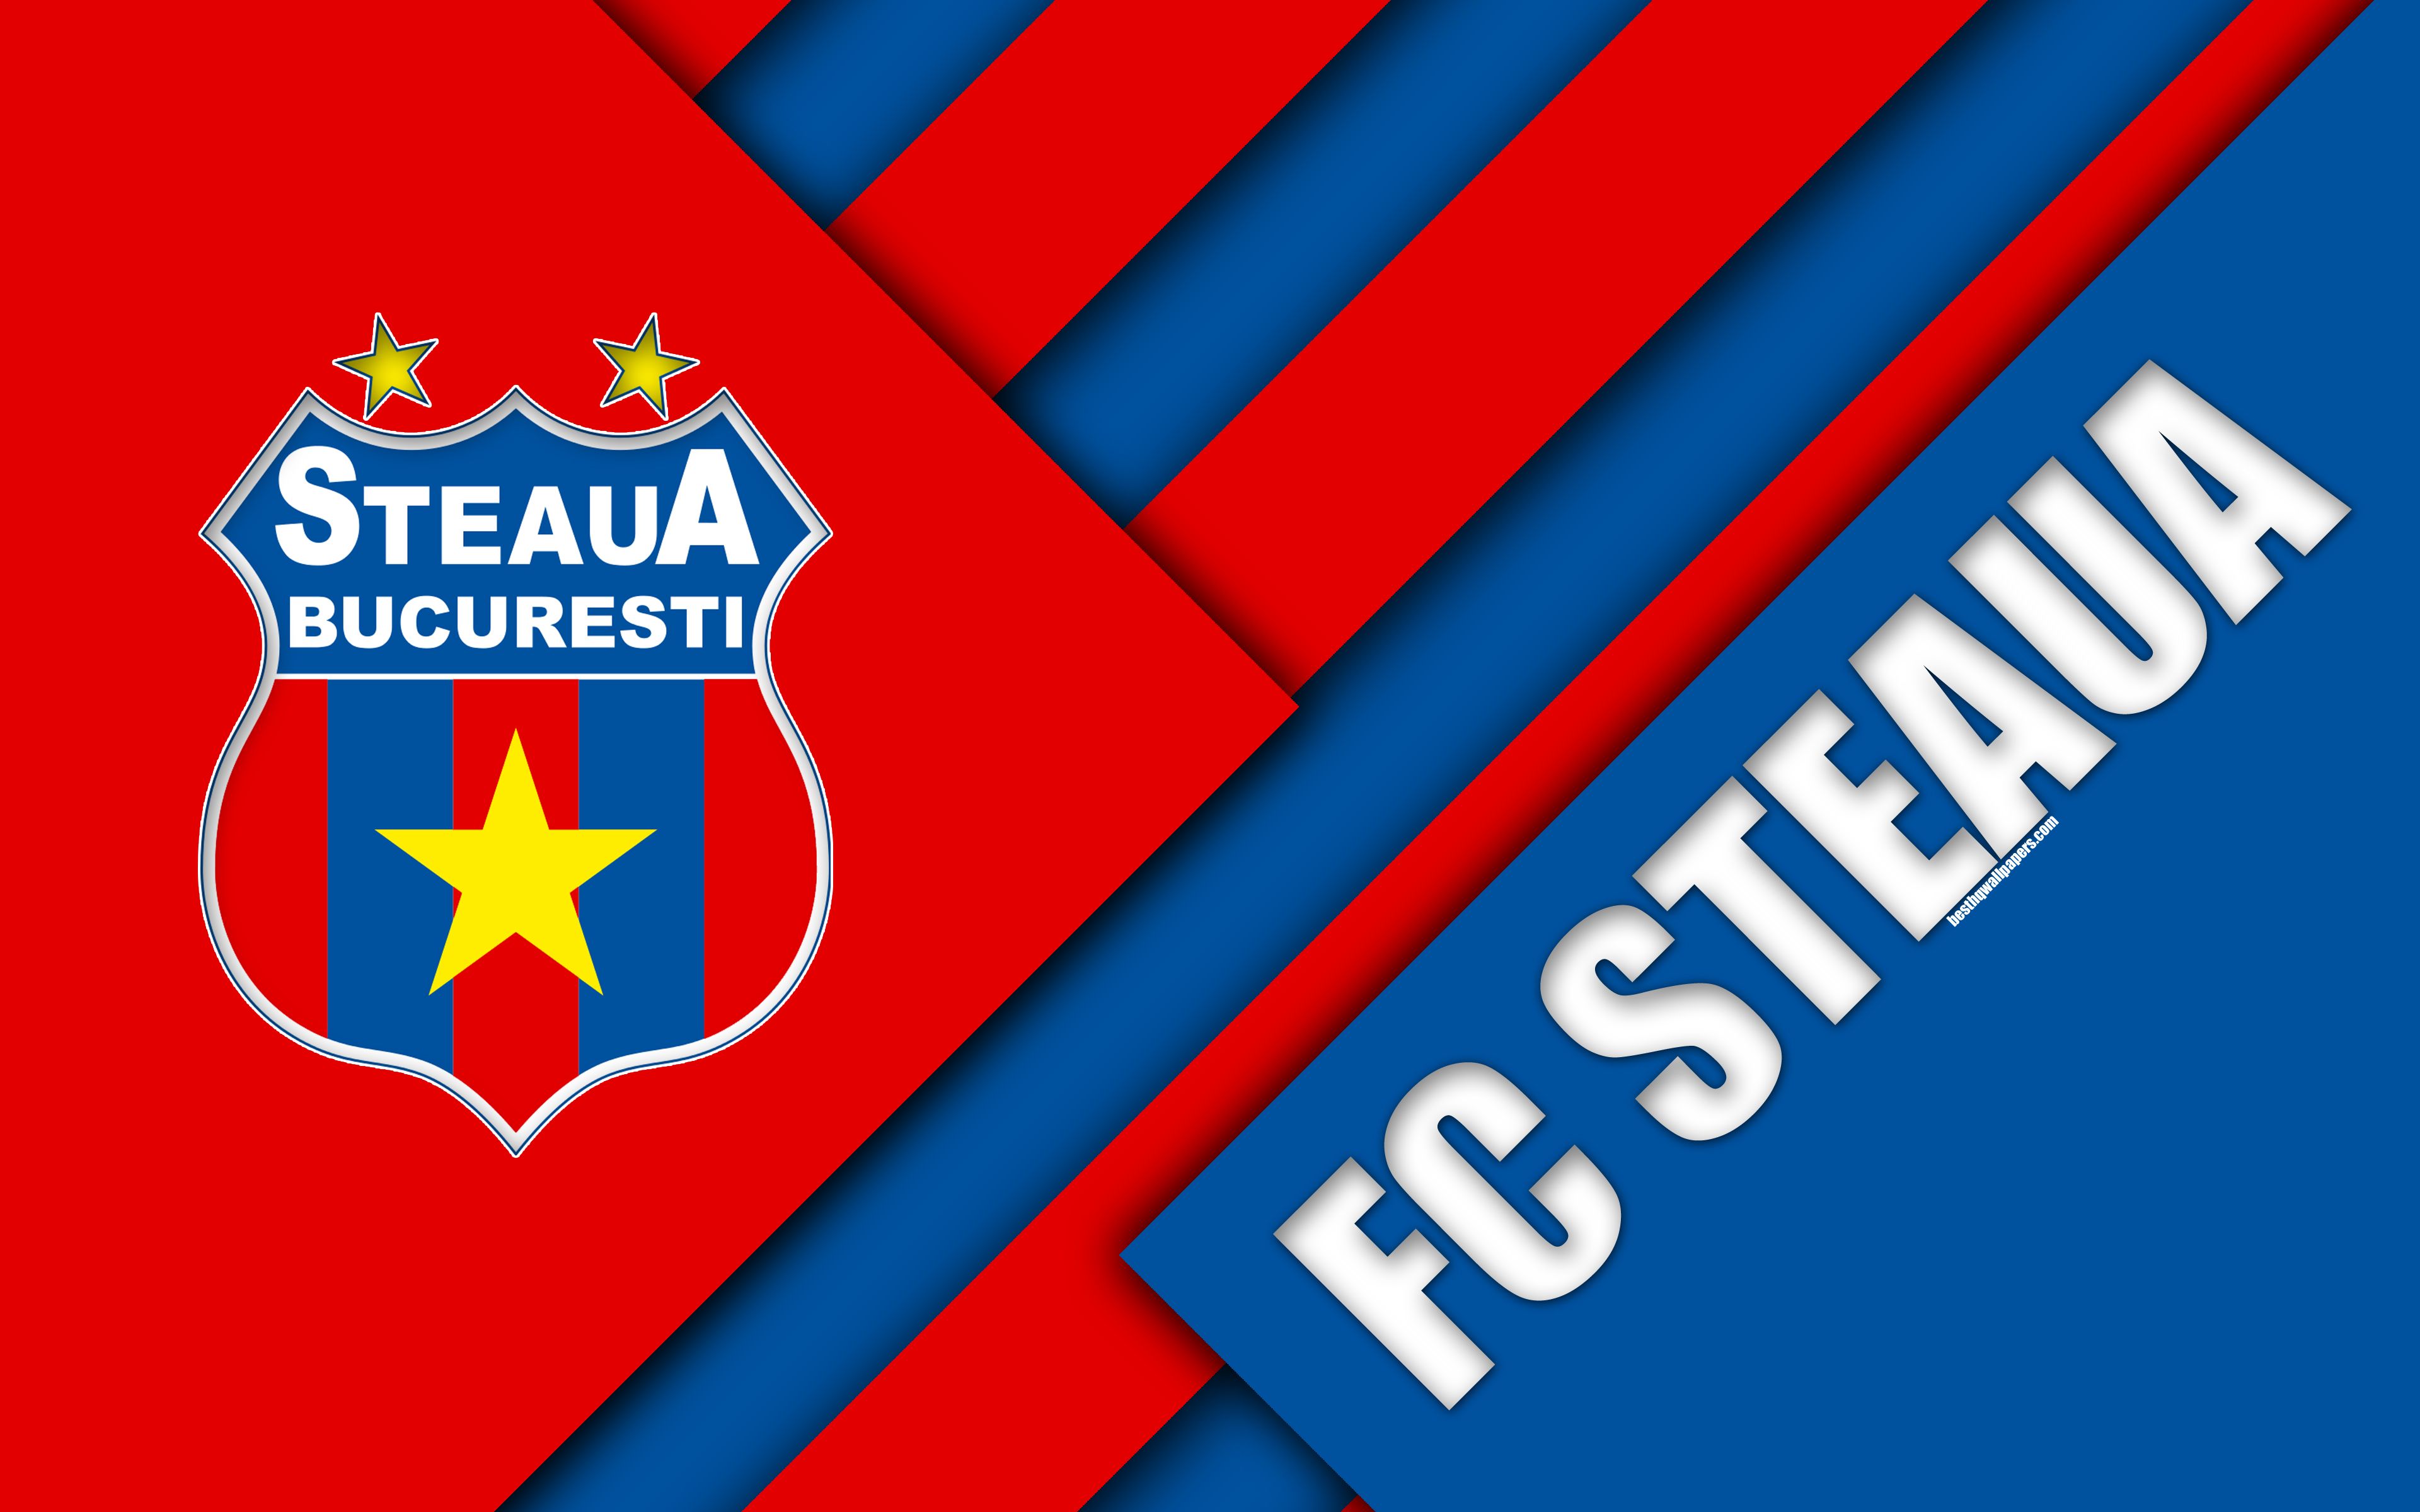 Download wallpaper FC Steaua Bucuresti, 4k, logo, material design, Romanian football club, blue red abstraction, Liga Bucharest, Romania, football, FC Steaua, FCSB for desktop with resolution 3840x2400. High Quality HD picture